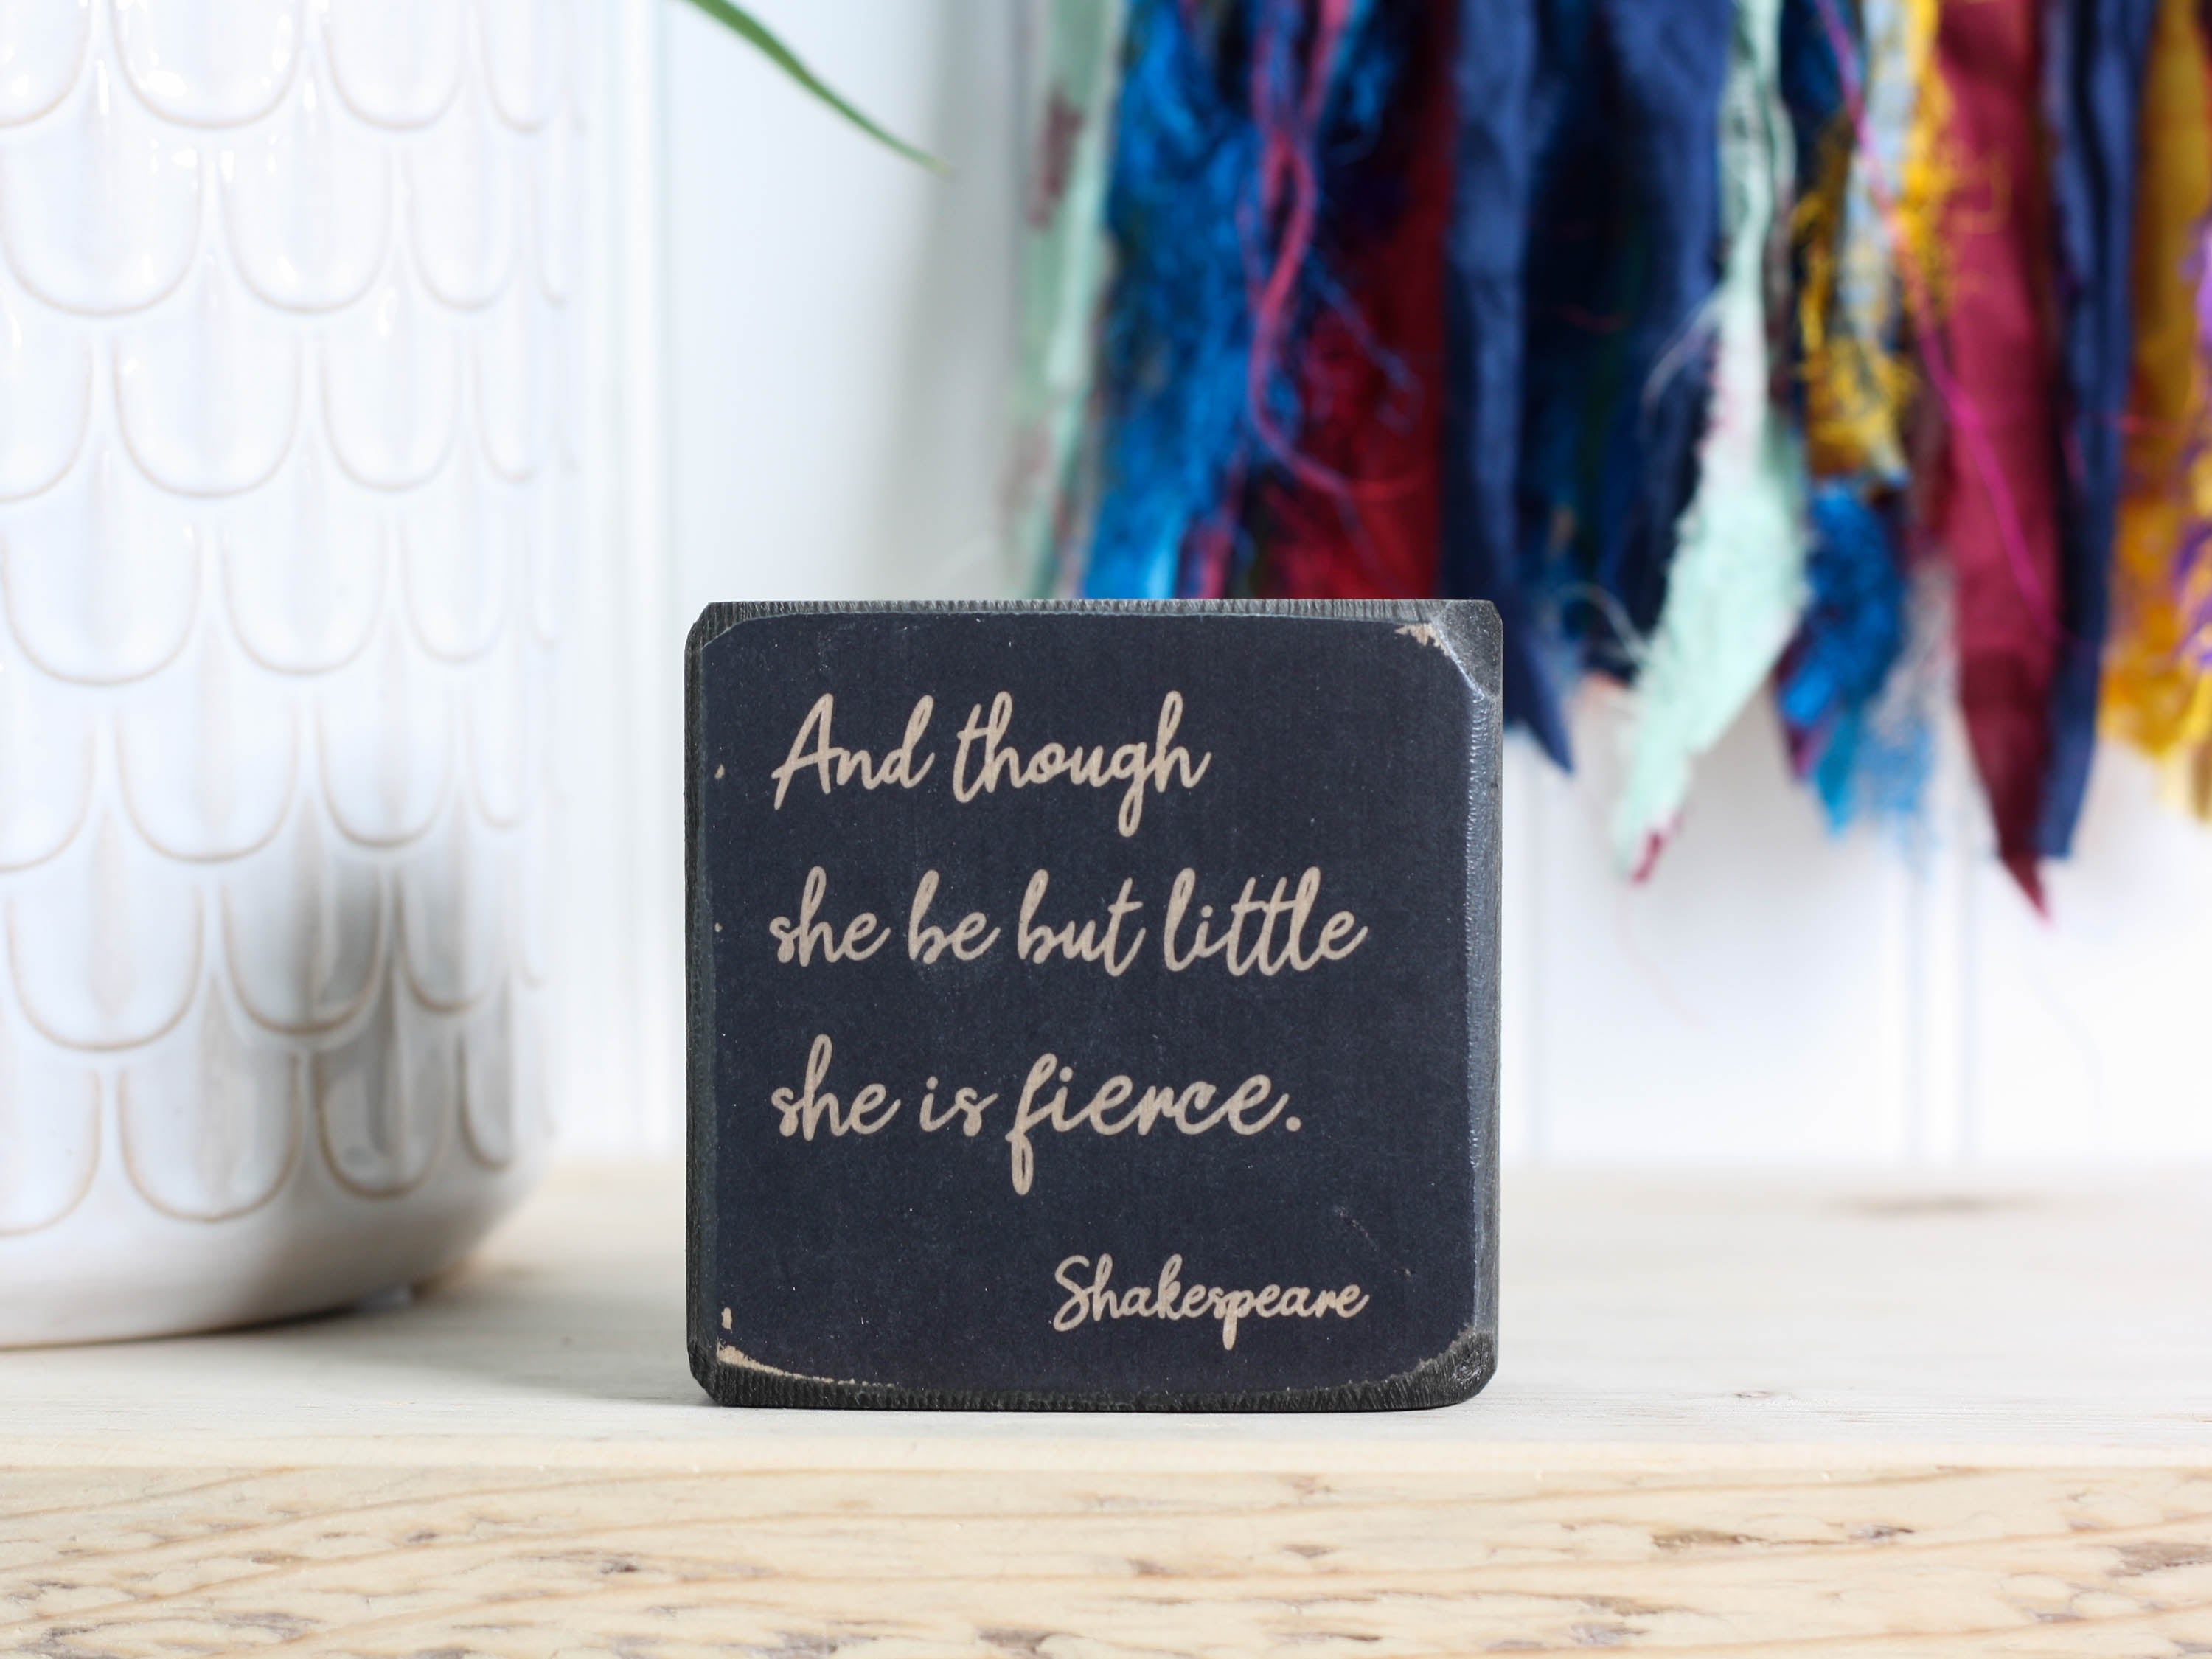 distressed black mini wood sign with the text And though she be but little, she is fierce. - Shakespeare